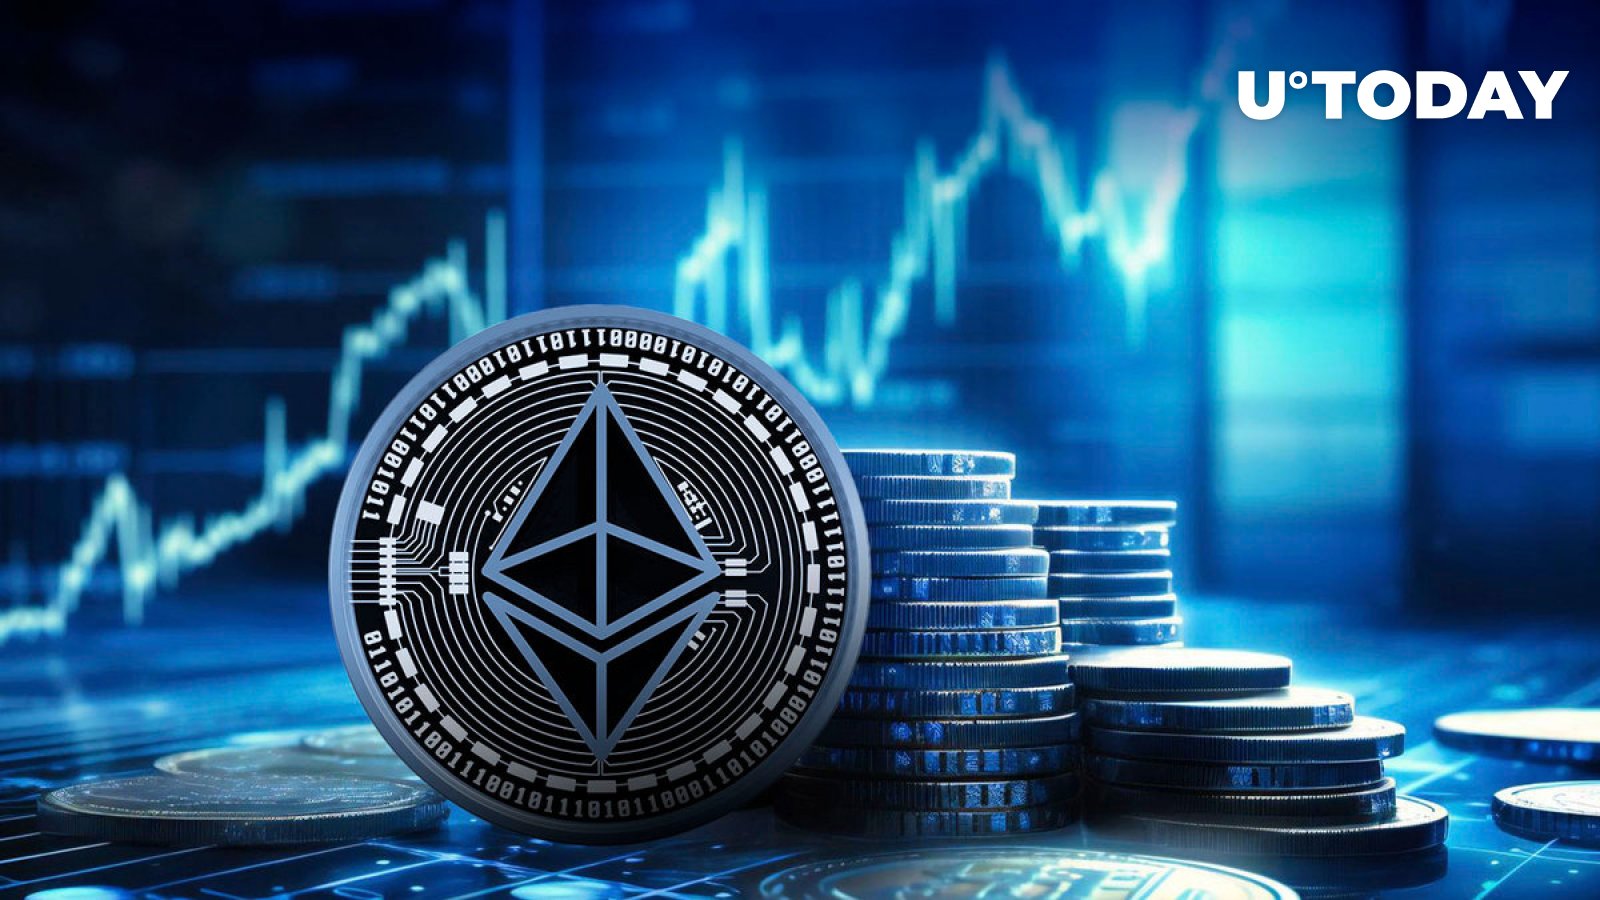 Ethereum (ETH) Stakers Are Back, Data Says